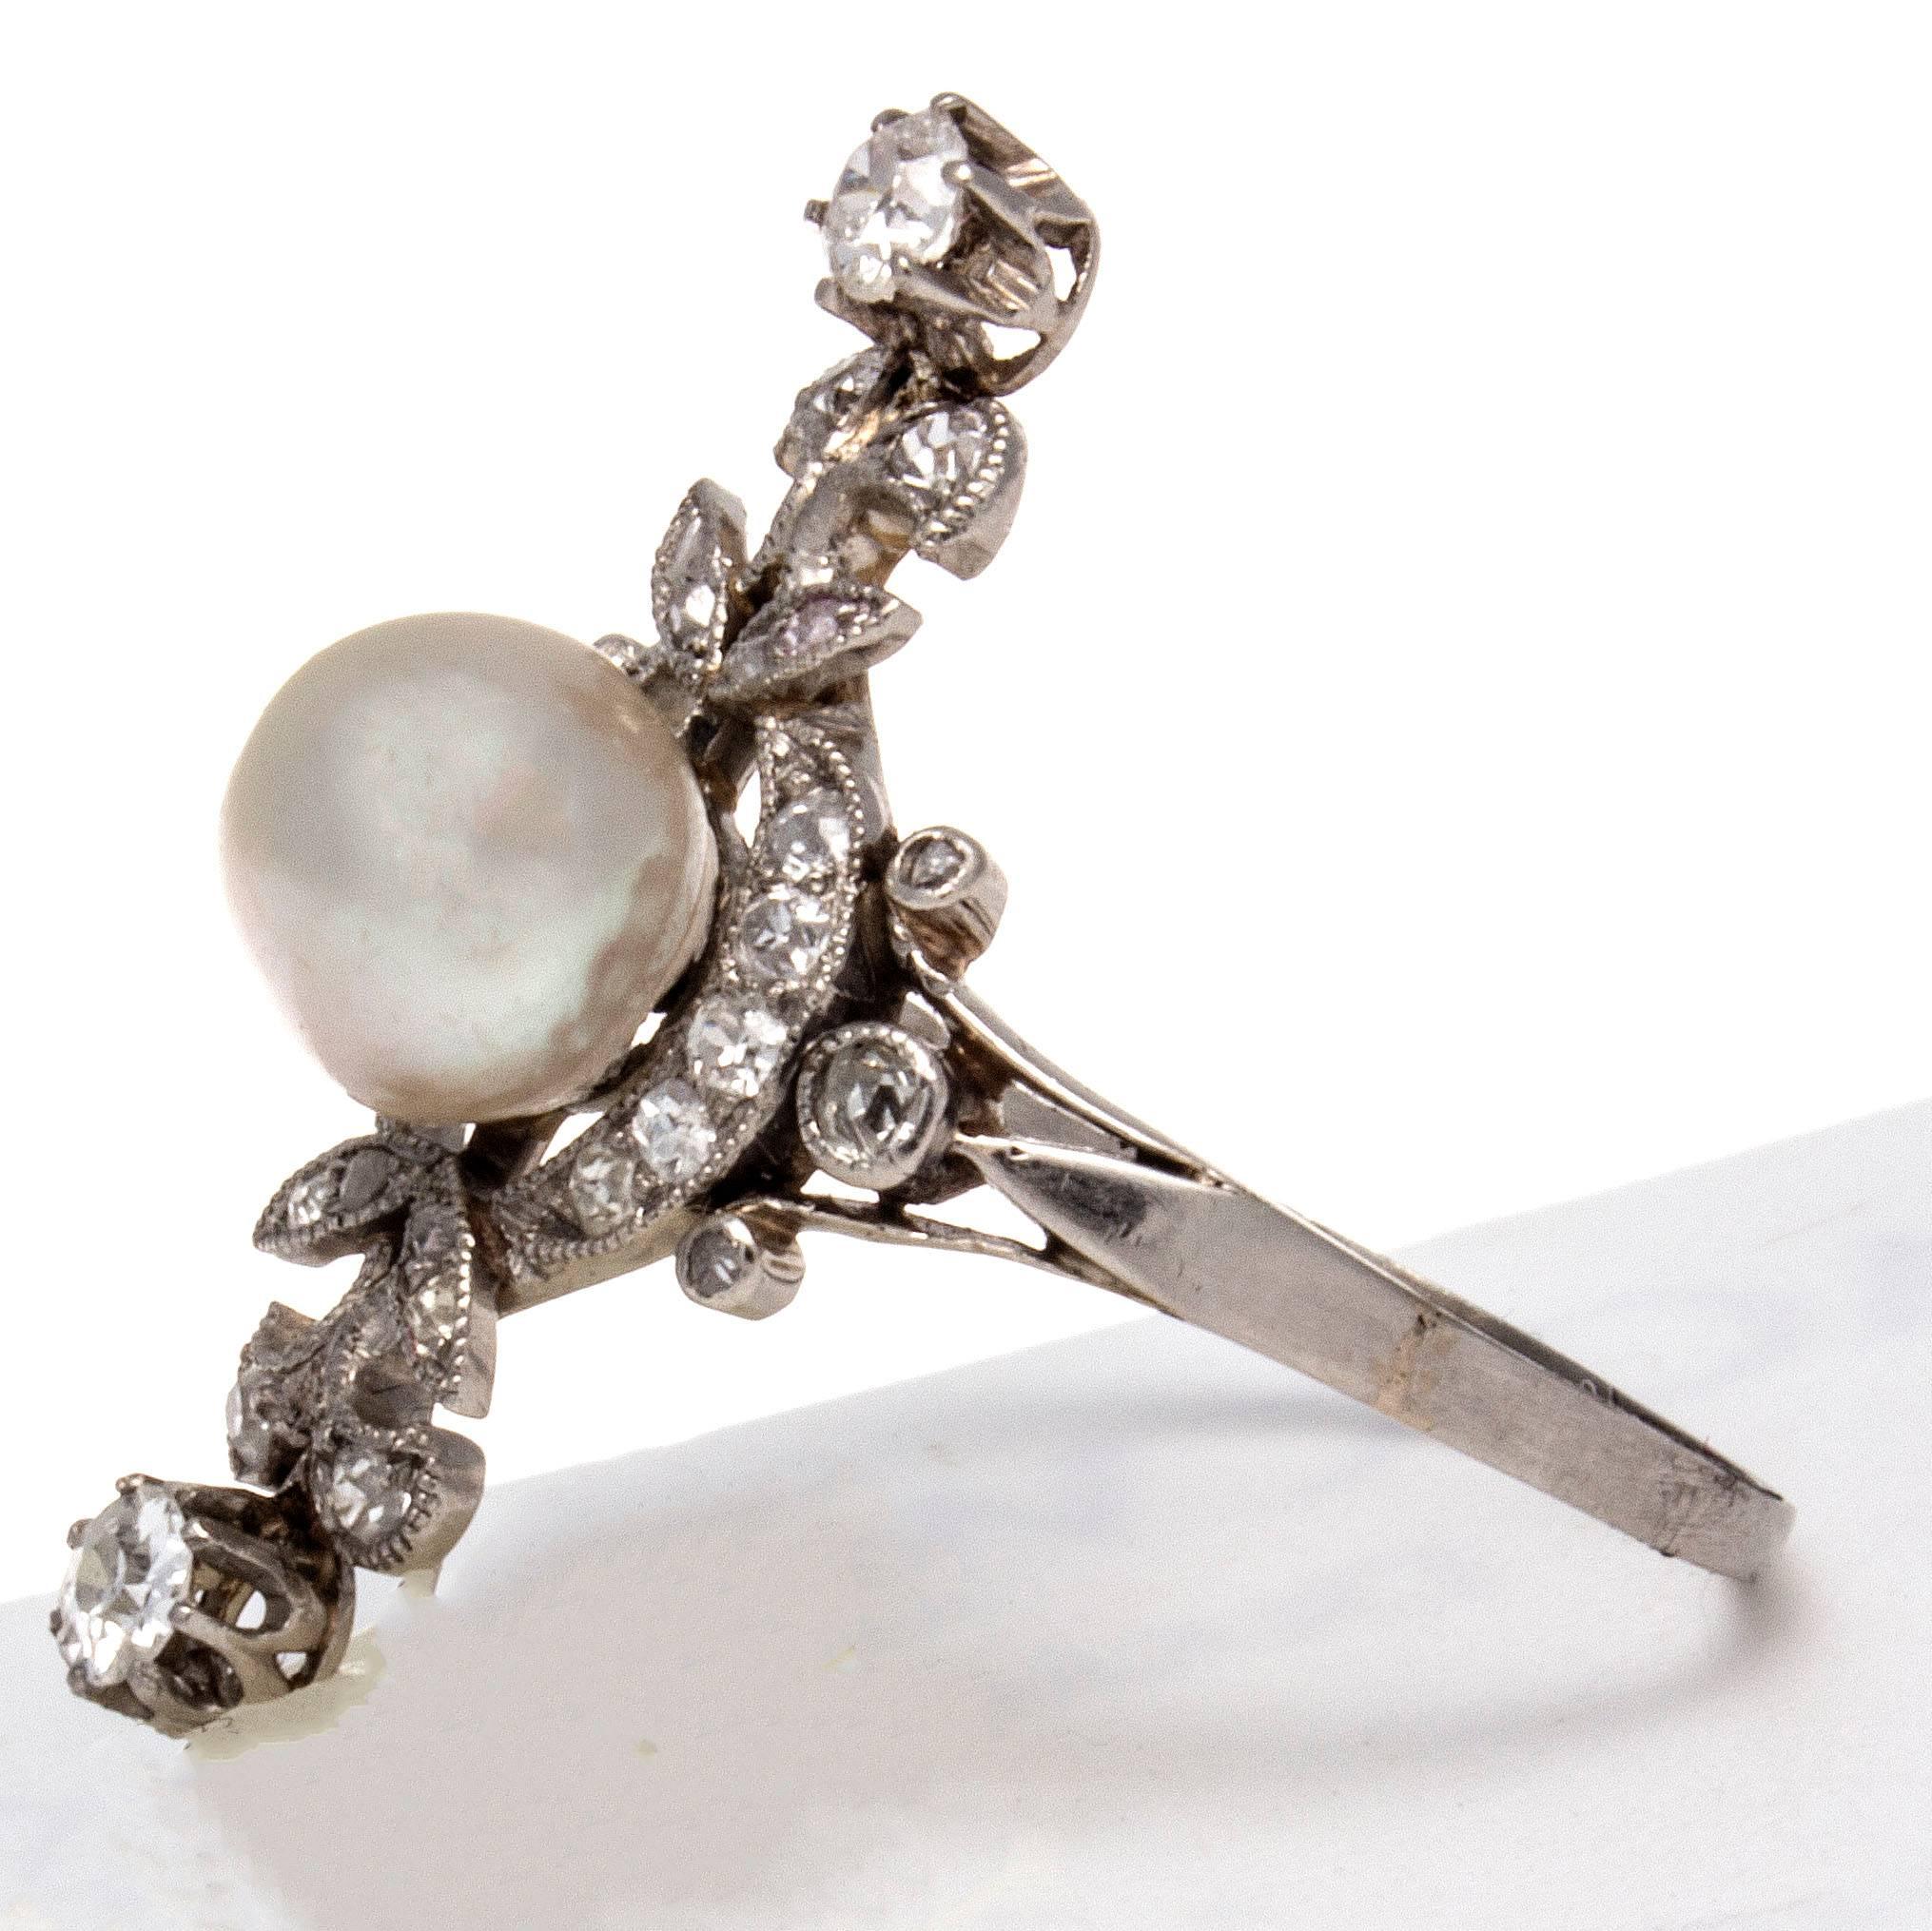 The ring is intricately crafted in platinum featuring a pearl that is GIA certified as a natural salt water. With numerous clean white diamonds adorning the ring.

Ring size 8 and may be resized to fit.